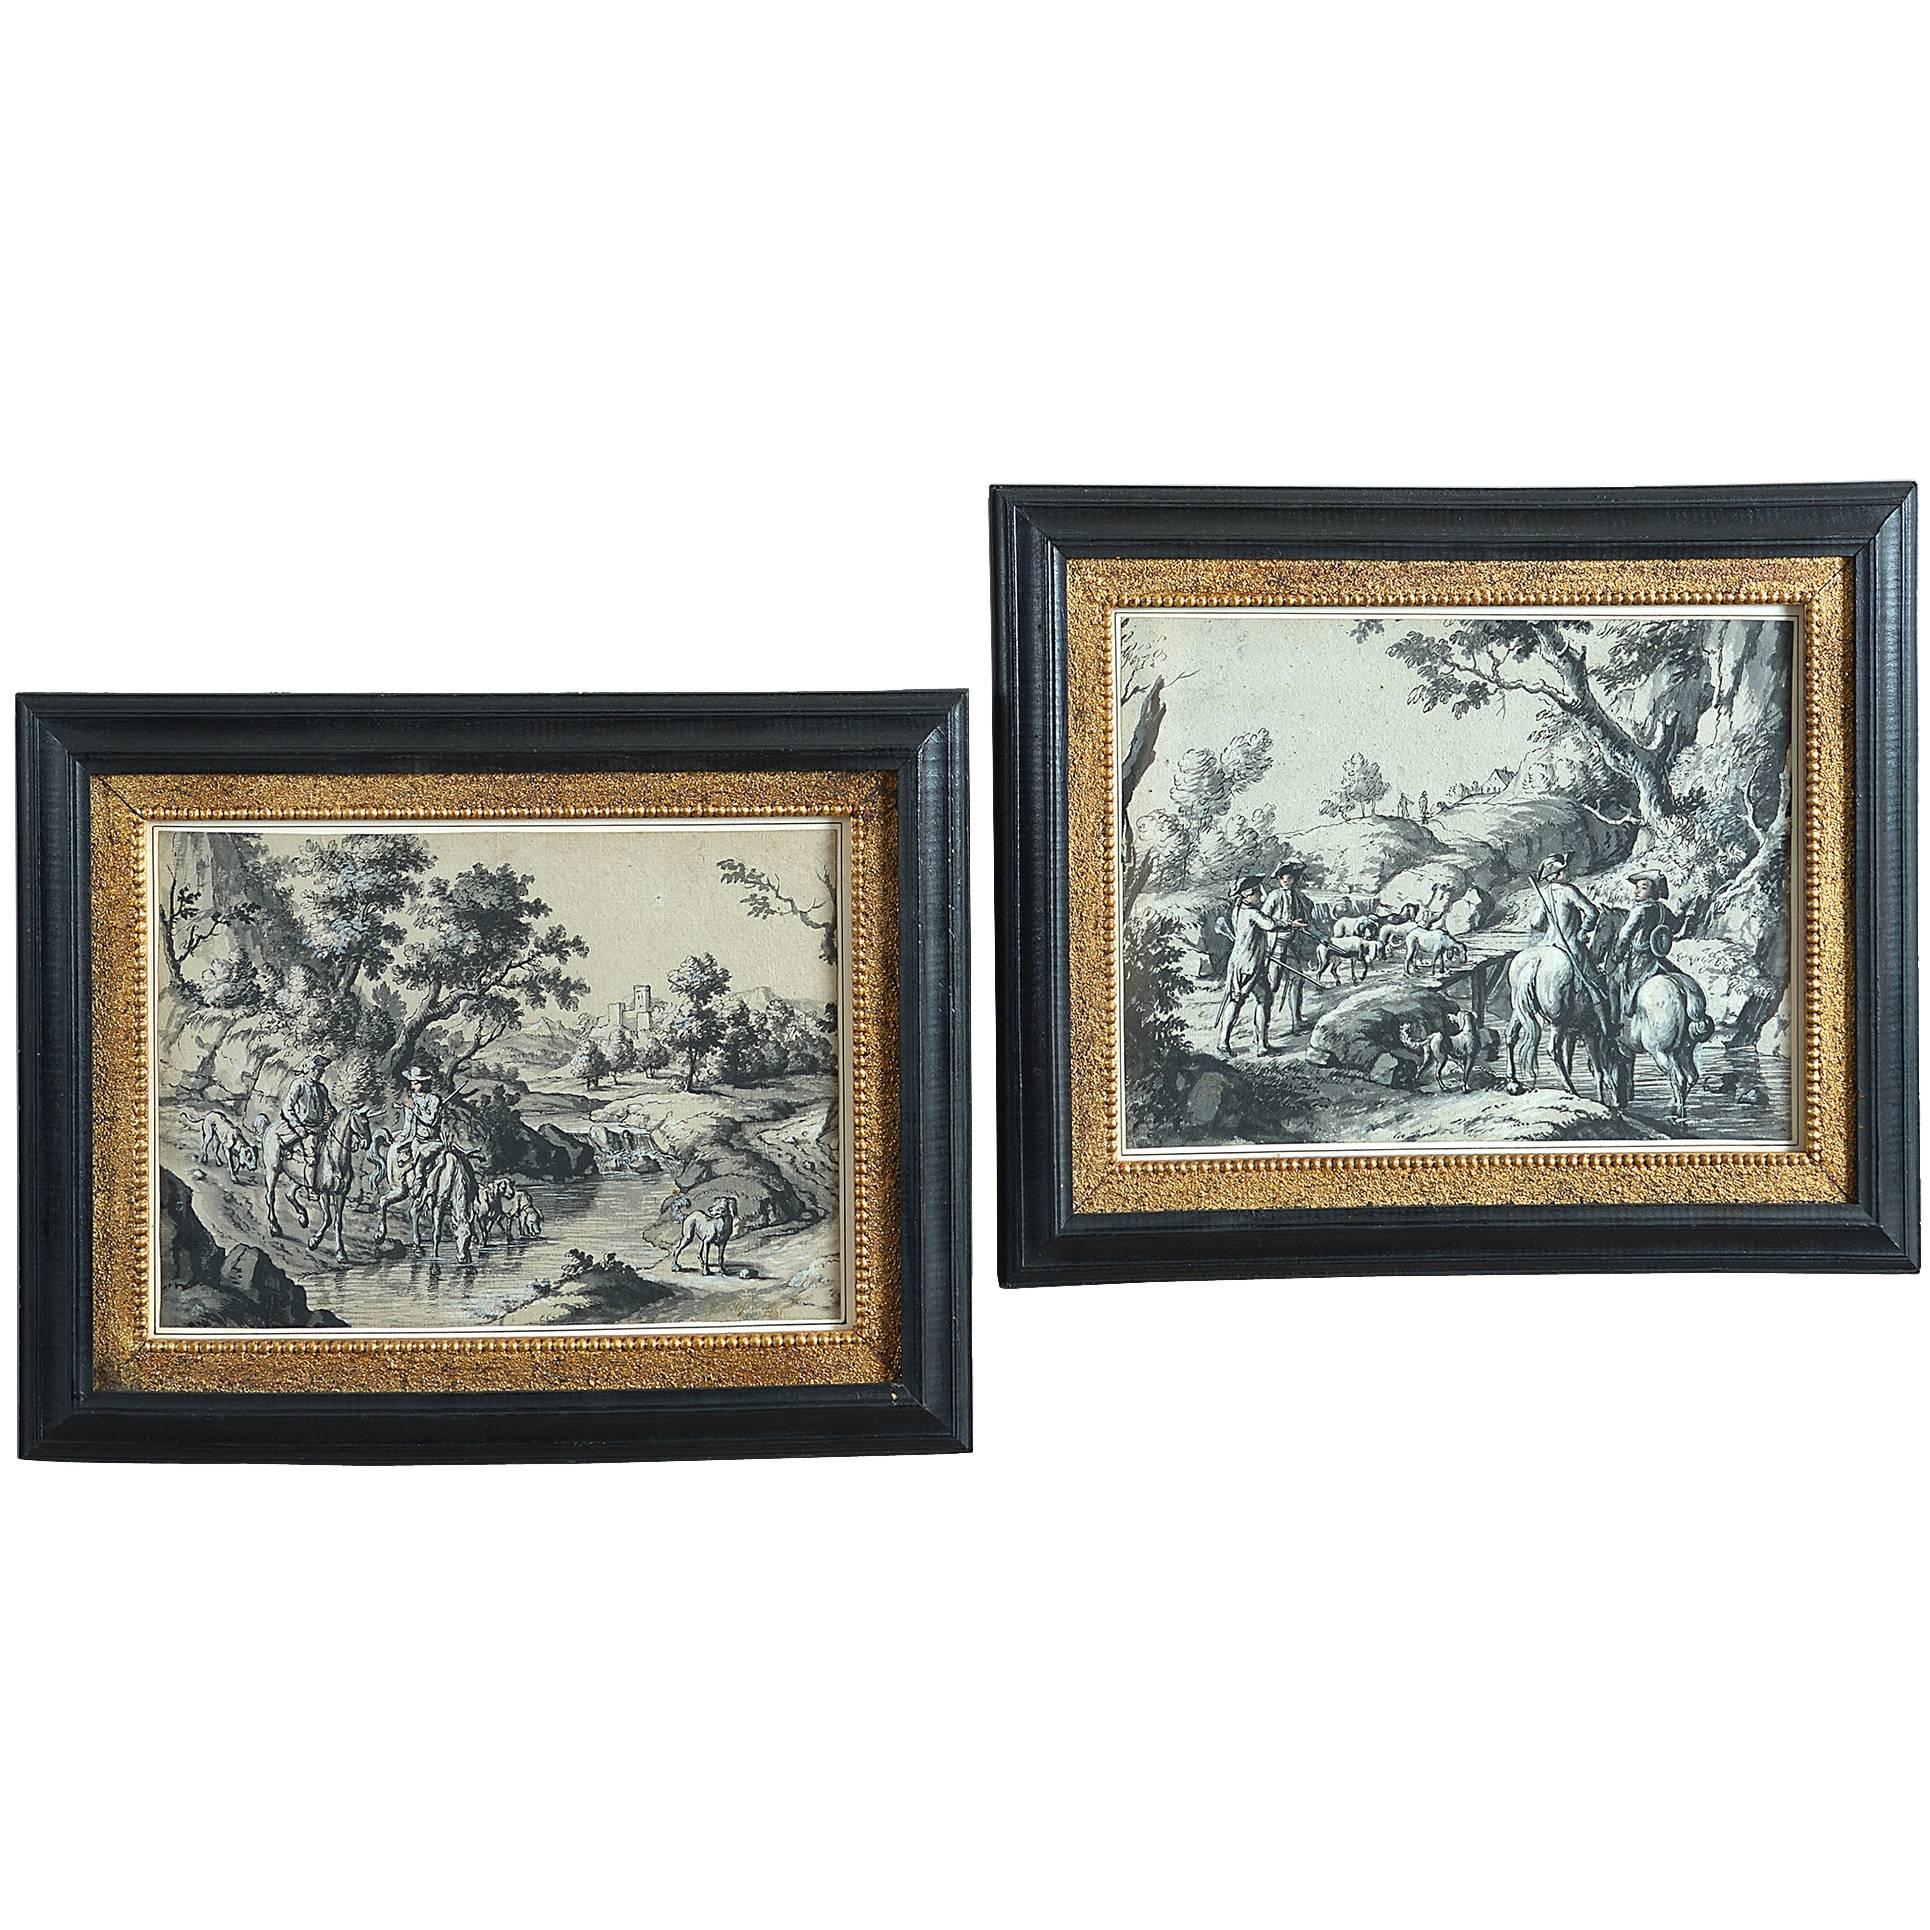 Two 18th Century Pen and Ink Landscape Drawings